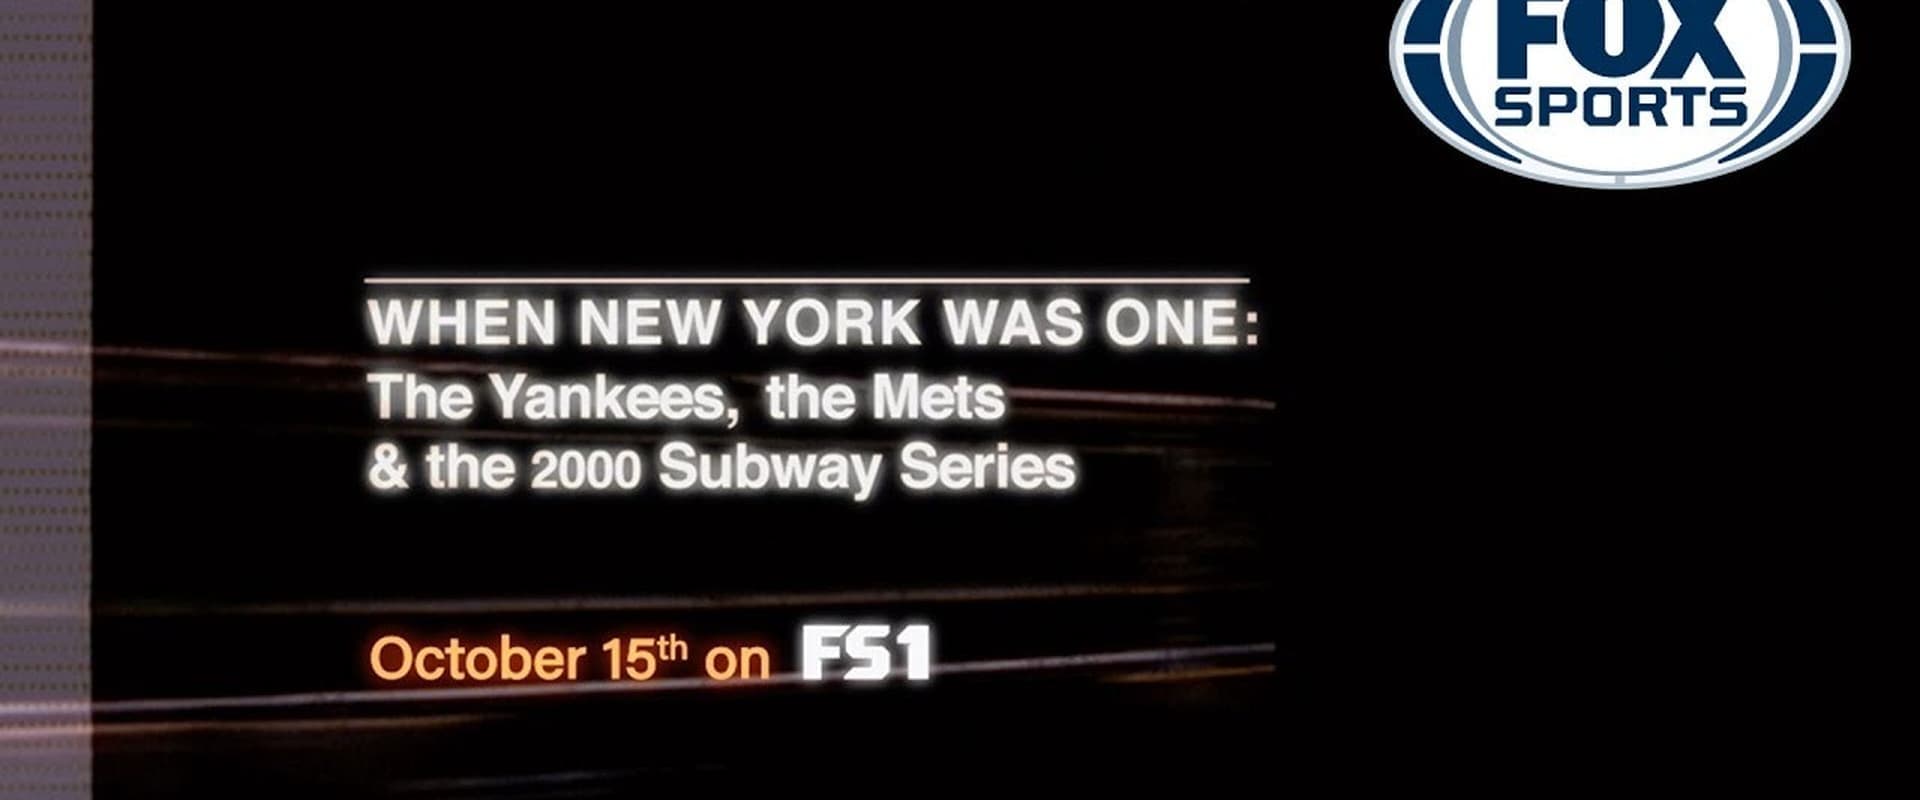 When New York Was One: The Yankees, the Mets & The 2000 Subway Series